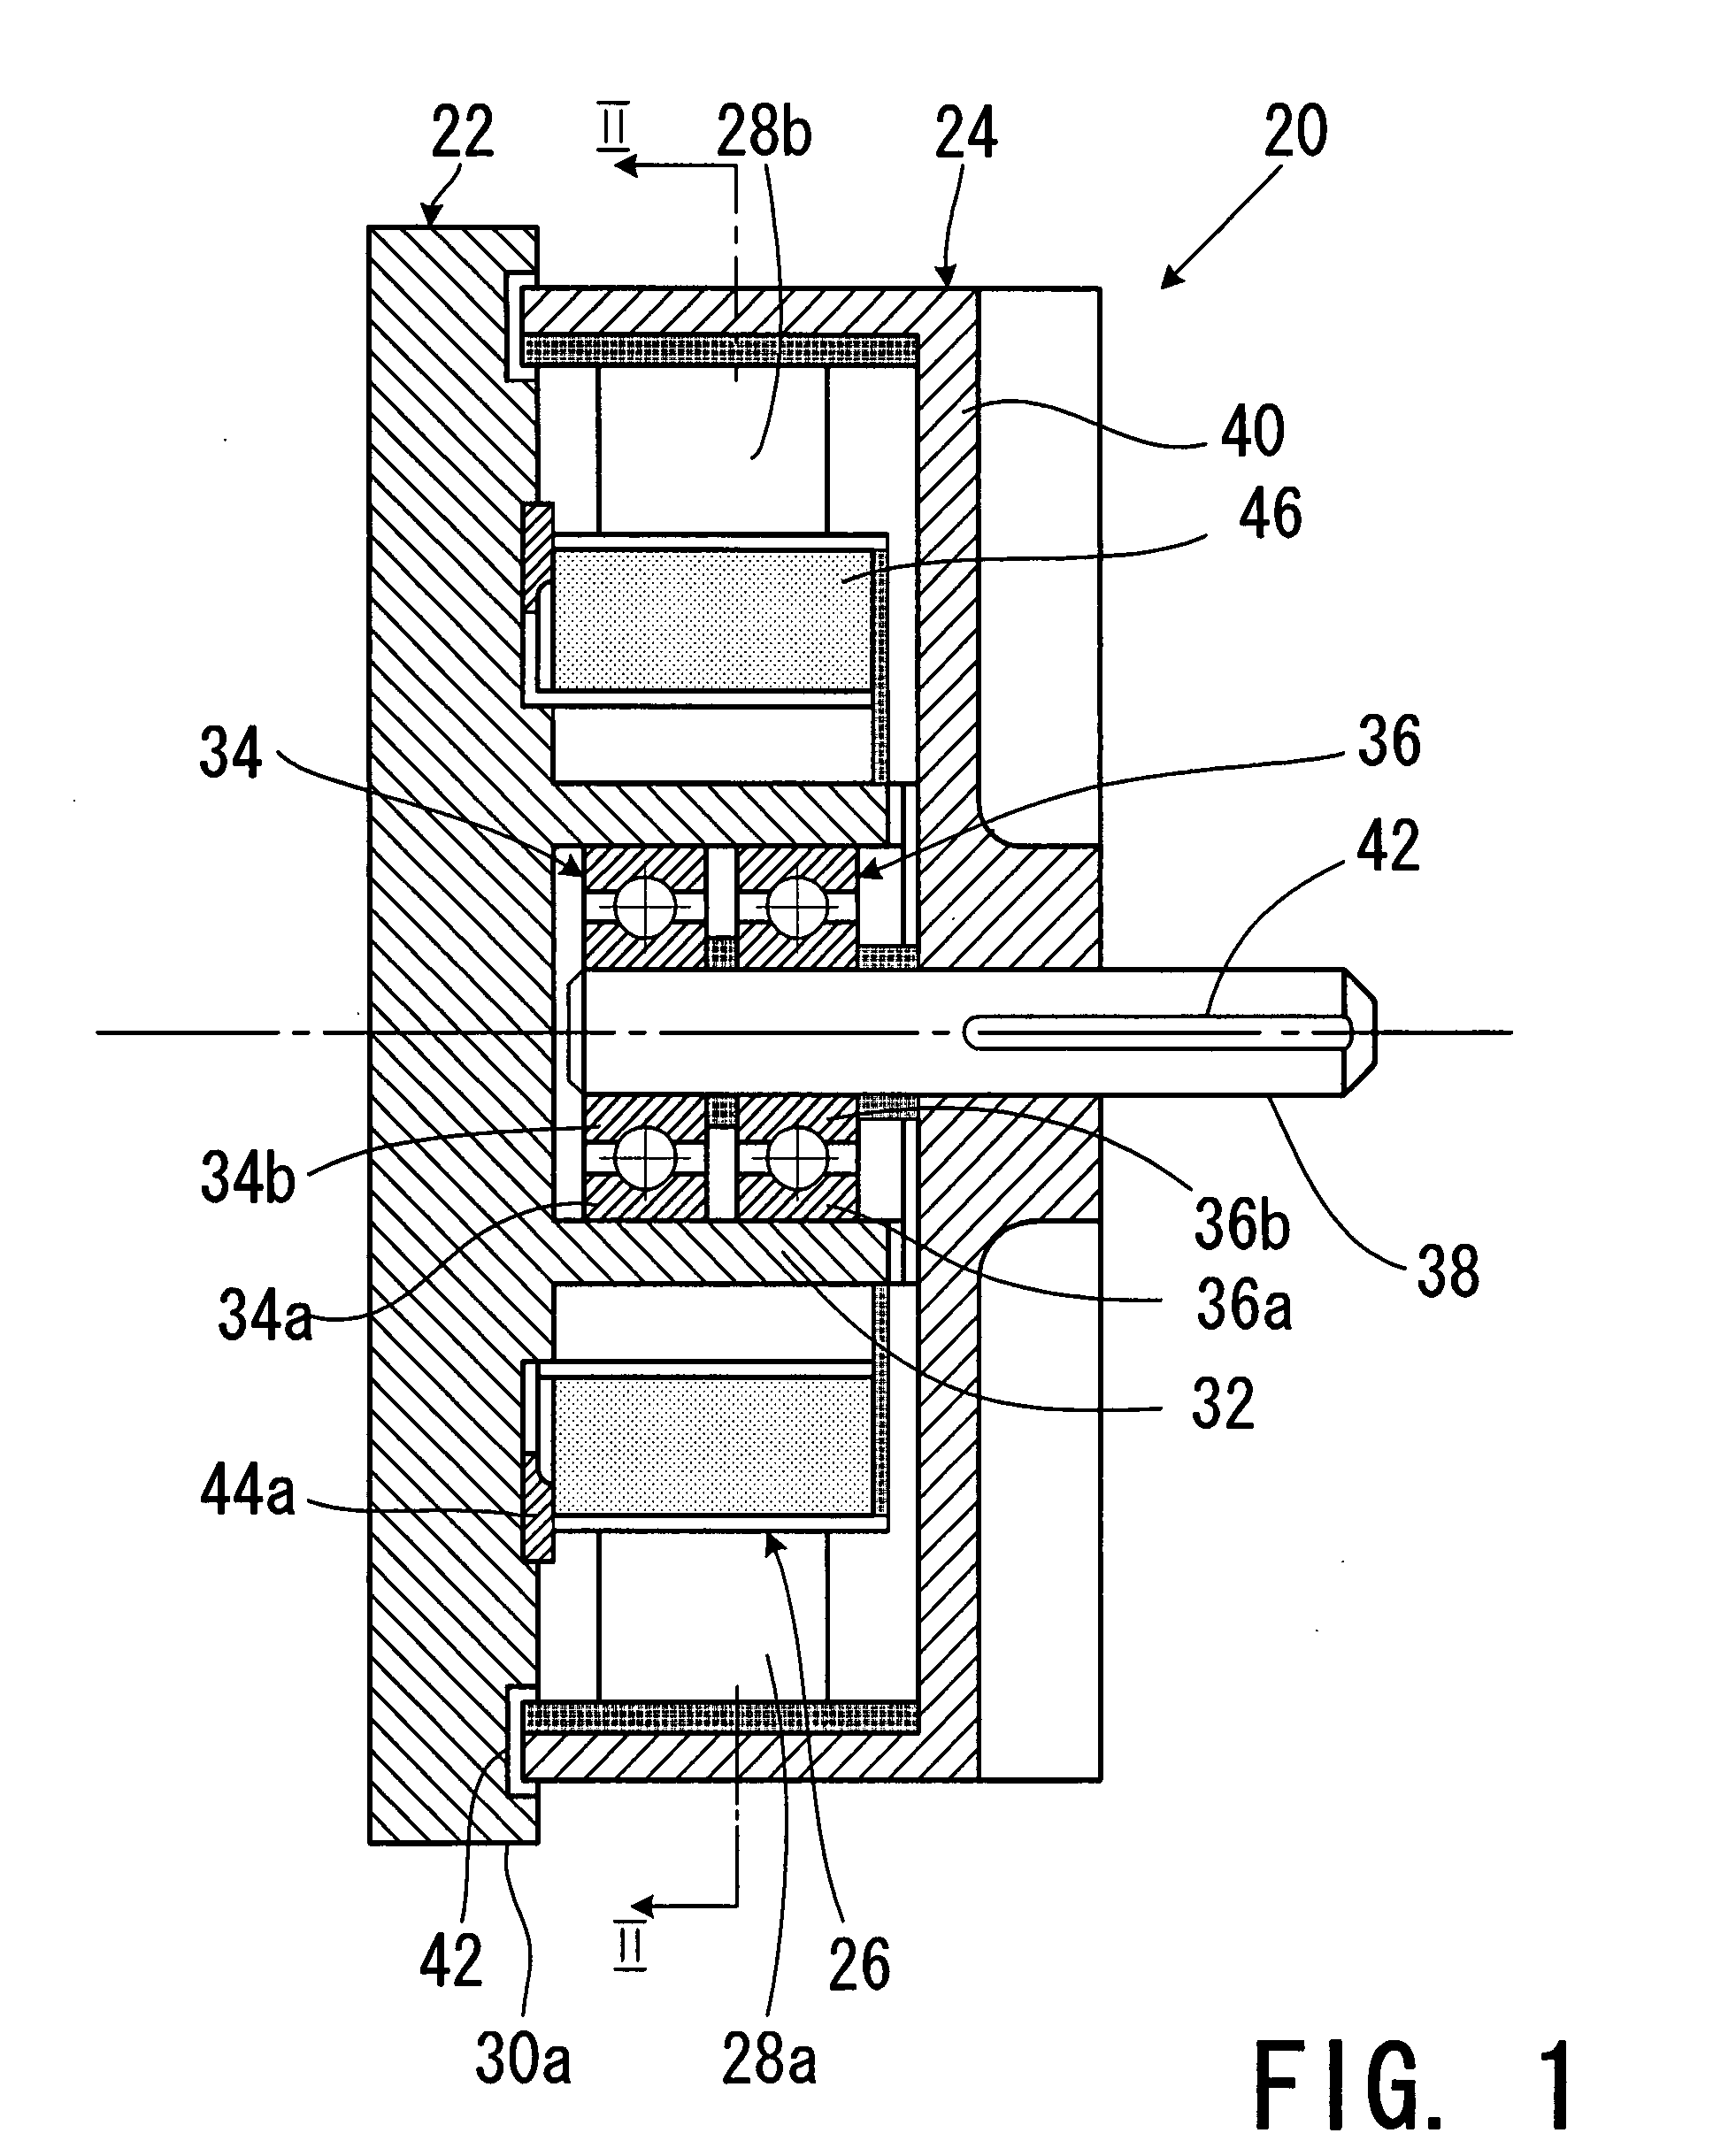 Apparatus for transforming inverse piezoelectric effect into rotary motion and method of manufacturing aforementioned apparatus